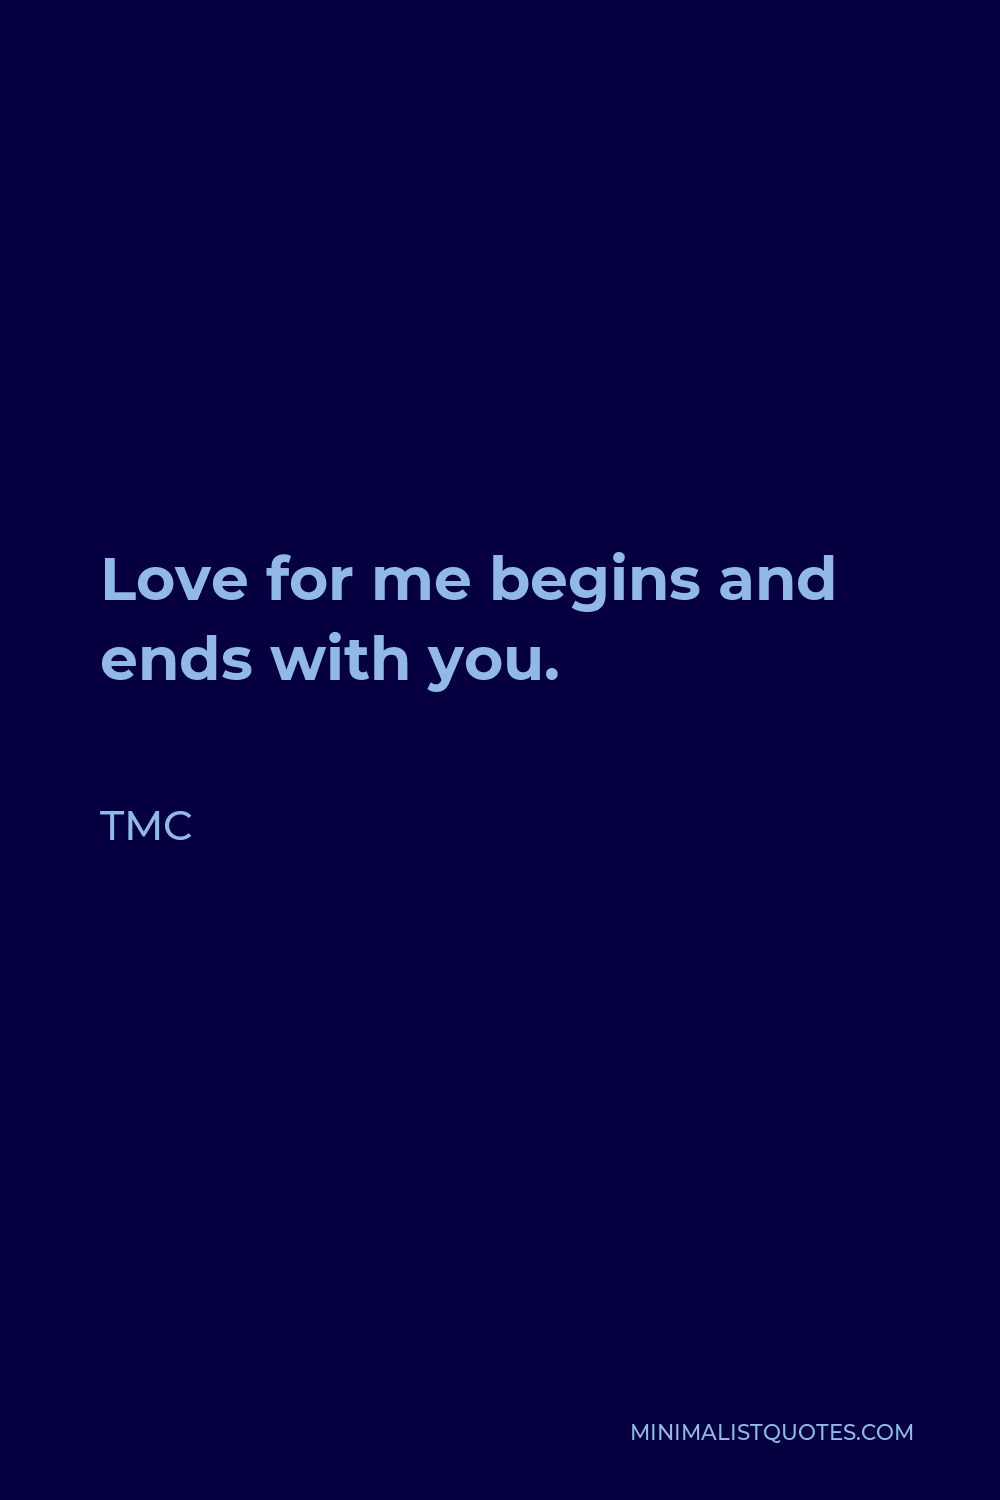 TMC Quote - Love for me begins and ends with you.